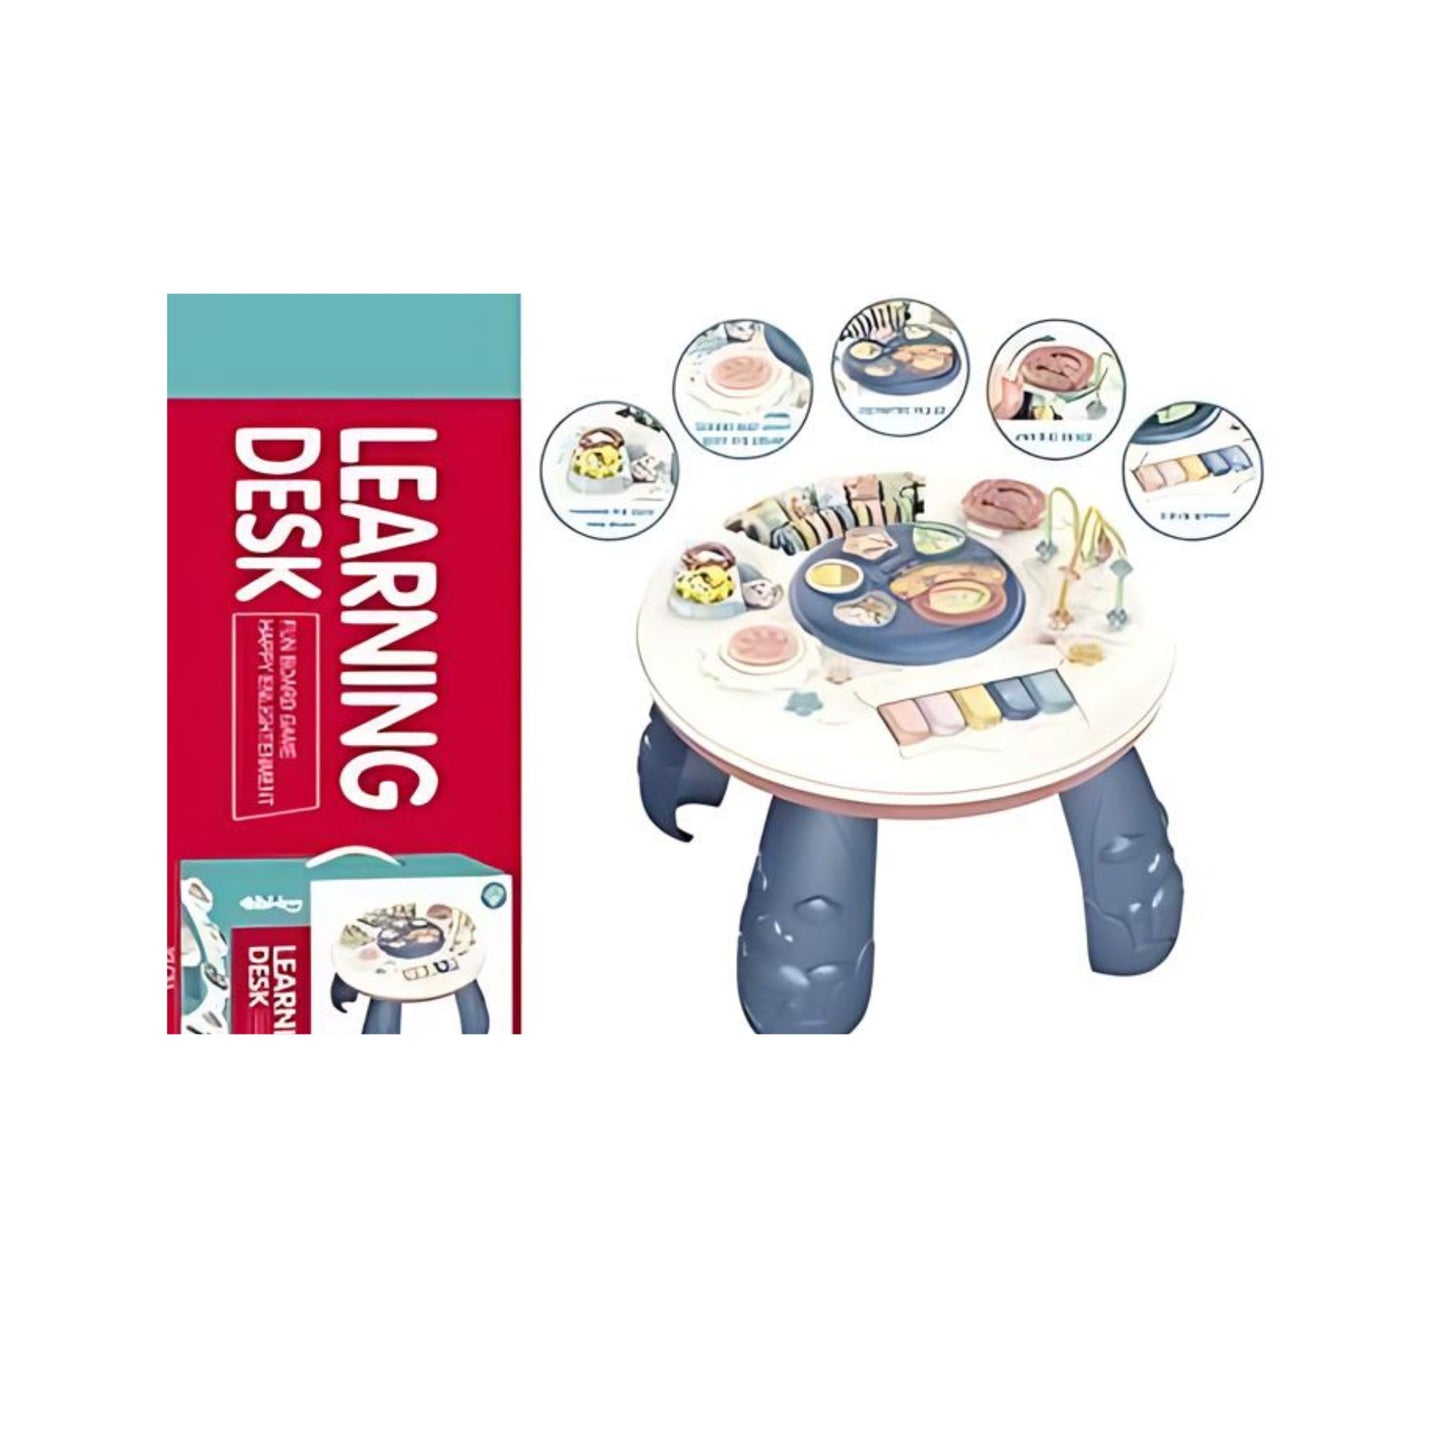 Little Fat Hugs Learning Game Desk W/Multi-functional Table I Suitable for babies, Encourages exploration, Builds strong foundation for future learning, and Developing motor skills